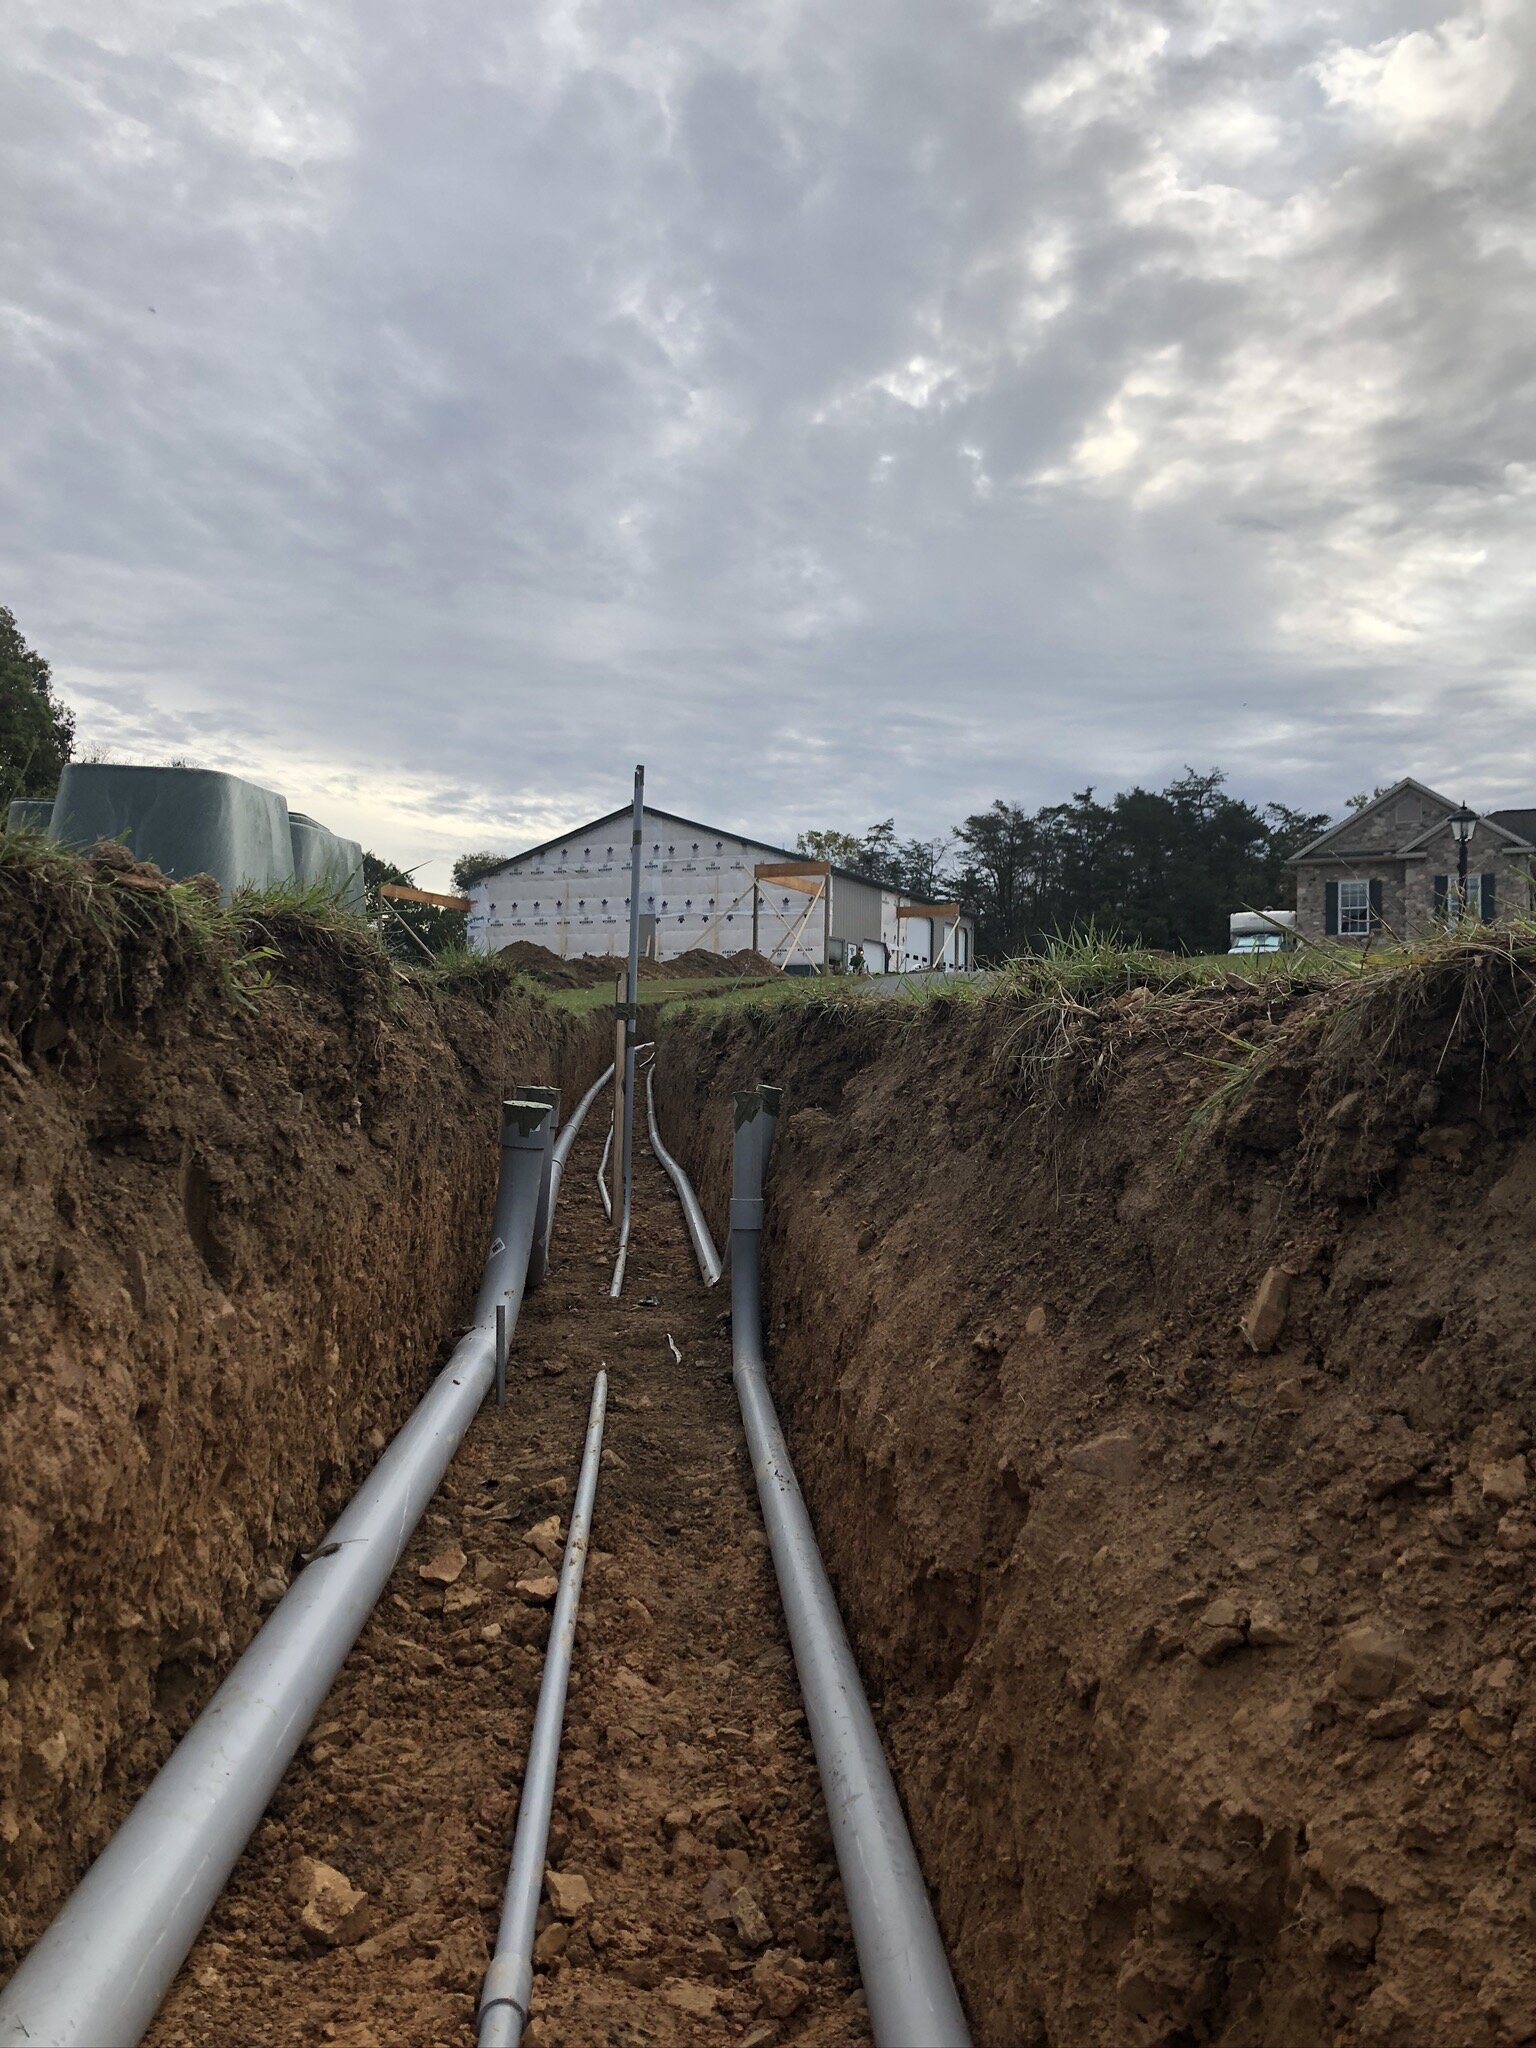 Electrical Conduit Ditch In Pine Grove, Pa